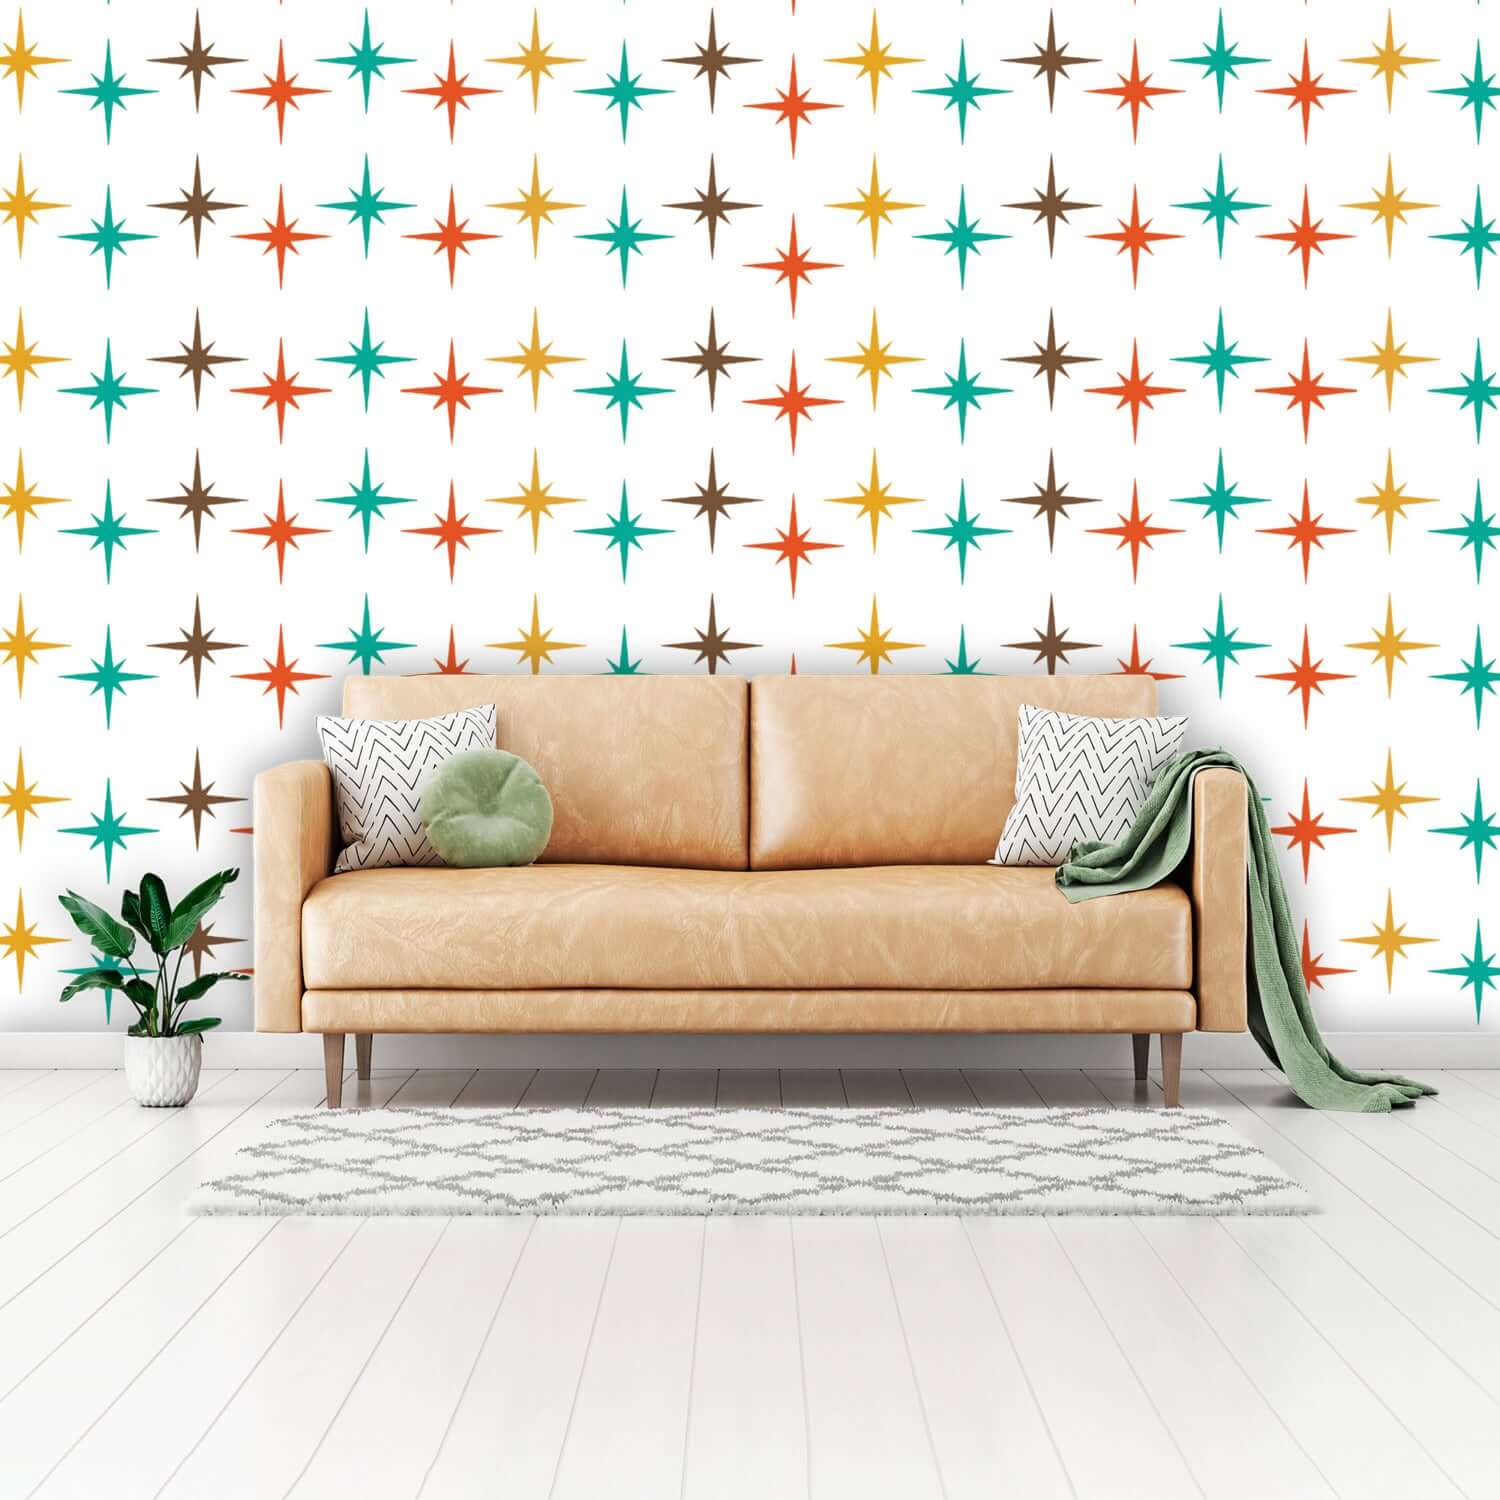 Atomic Age Unique Home Decor Peel And Stick Mid Century Modern, Mid Mod MCM Wall Murals Wallpaper H110 x W160